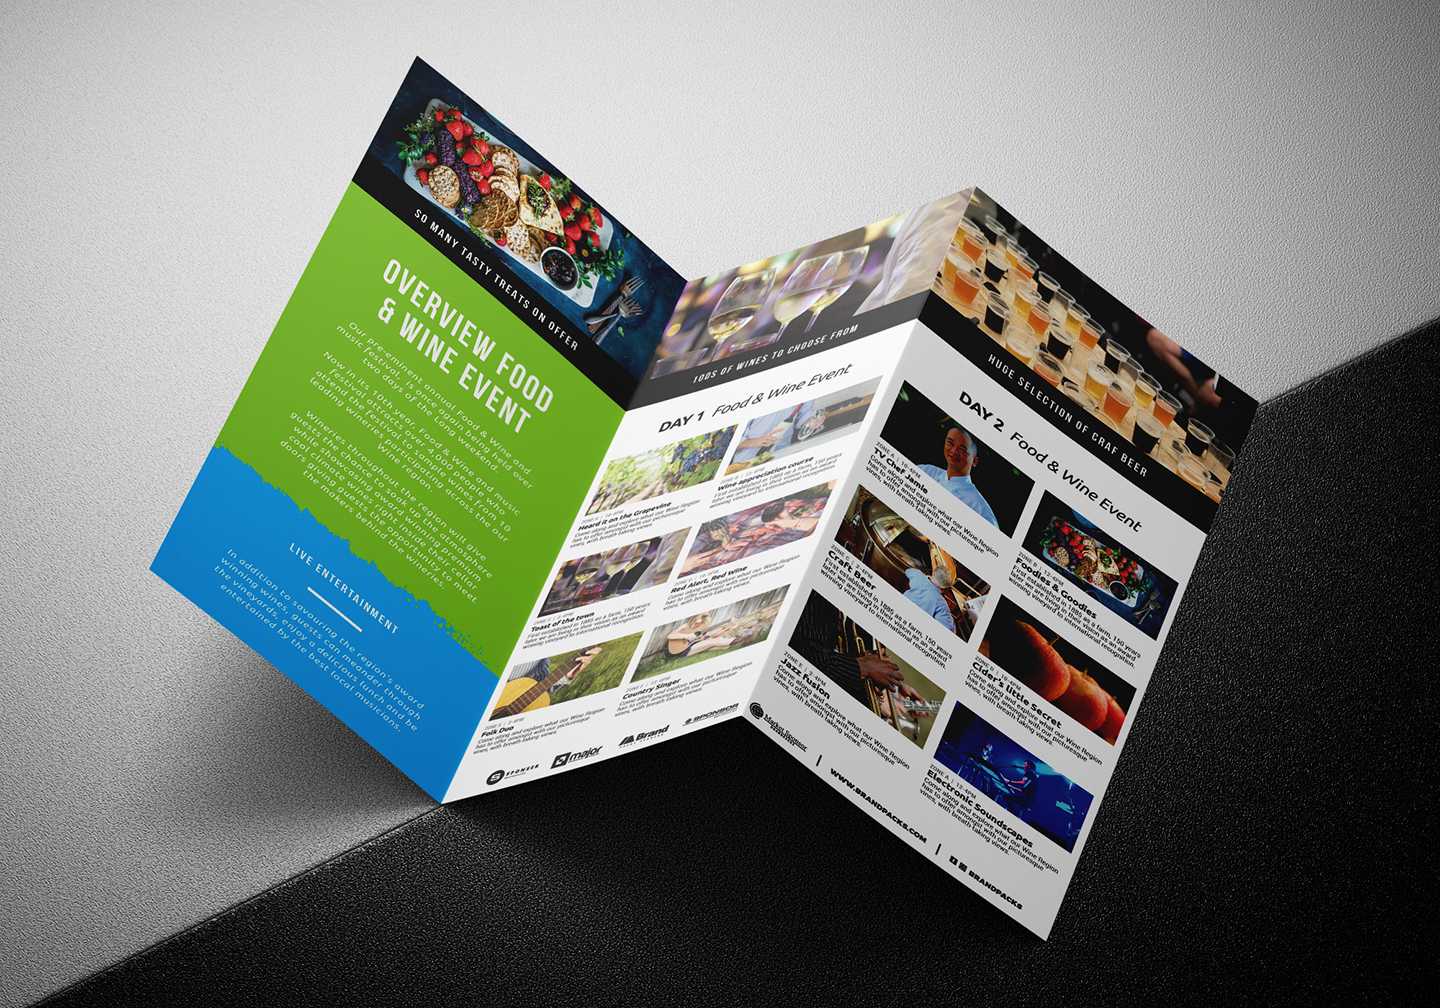 Free Tri Fold Brochure Template For Events & Festivals – Psd Inside Tri Fold Brochure Template Illustrator